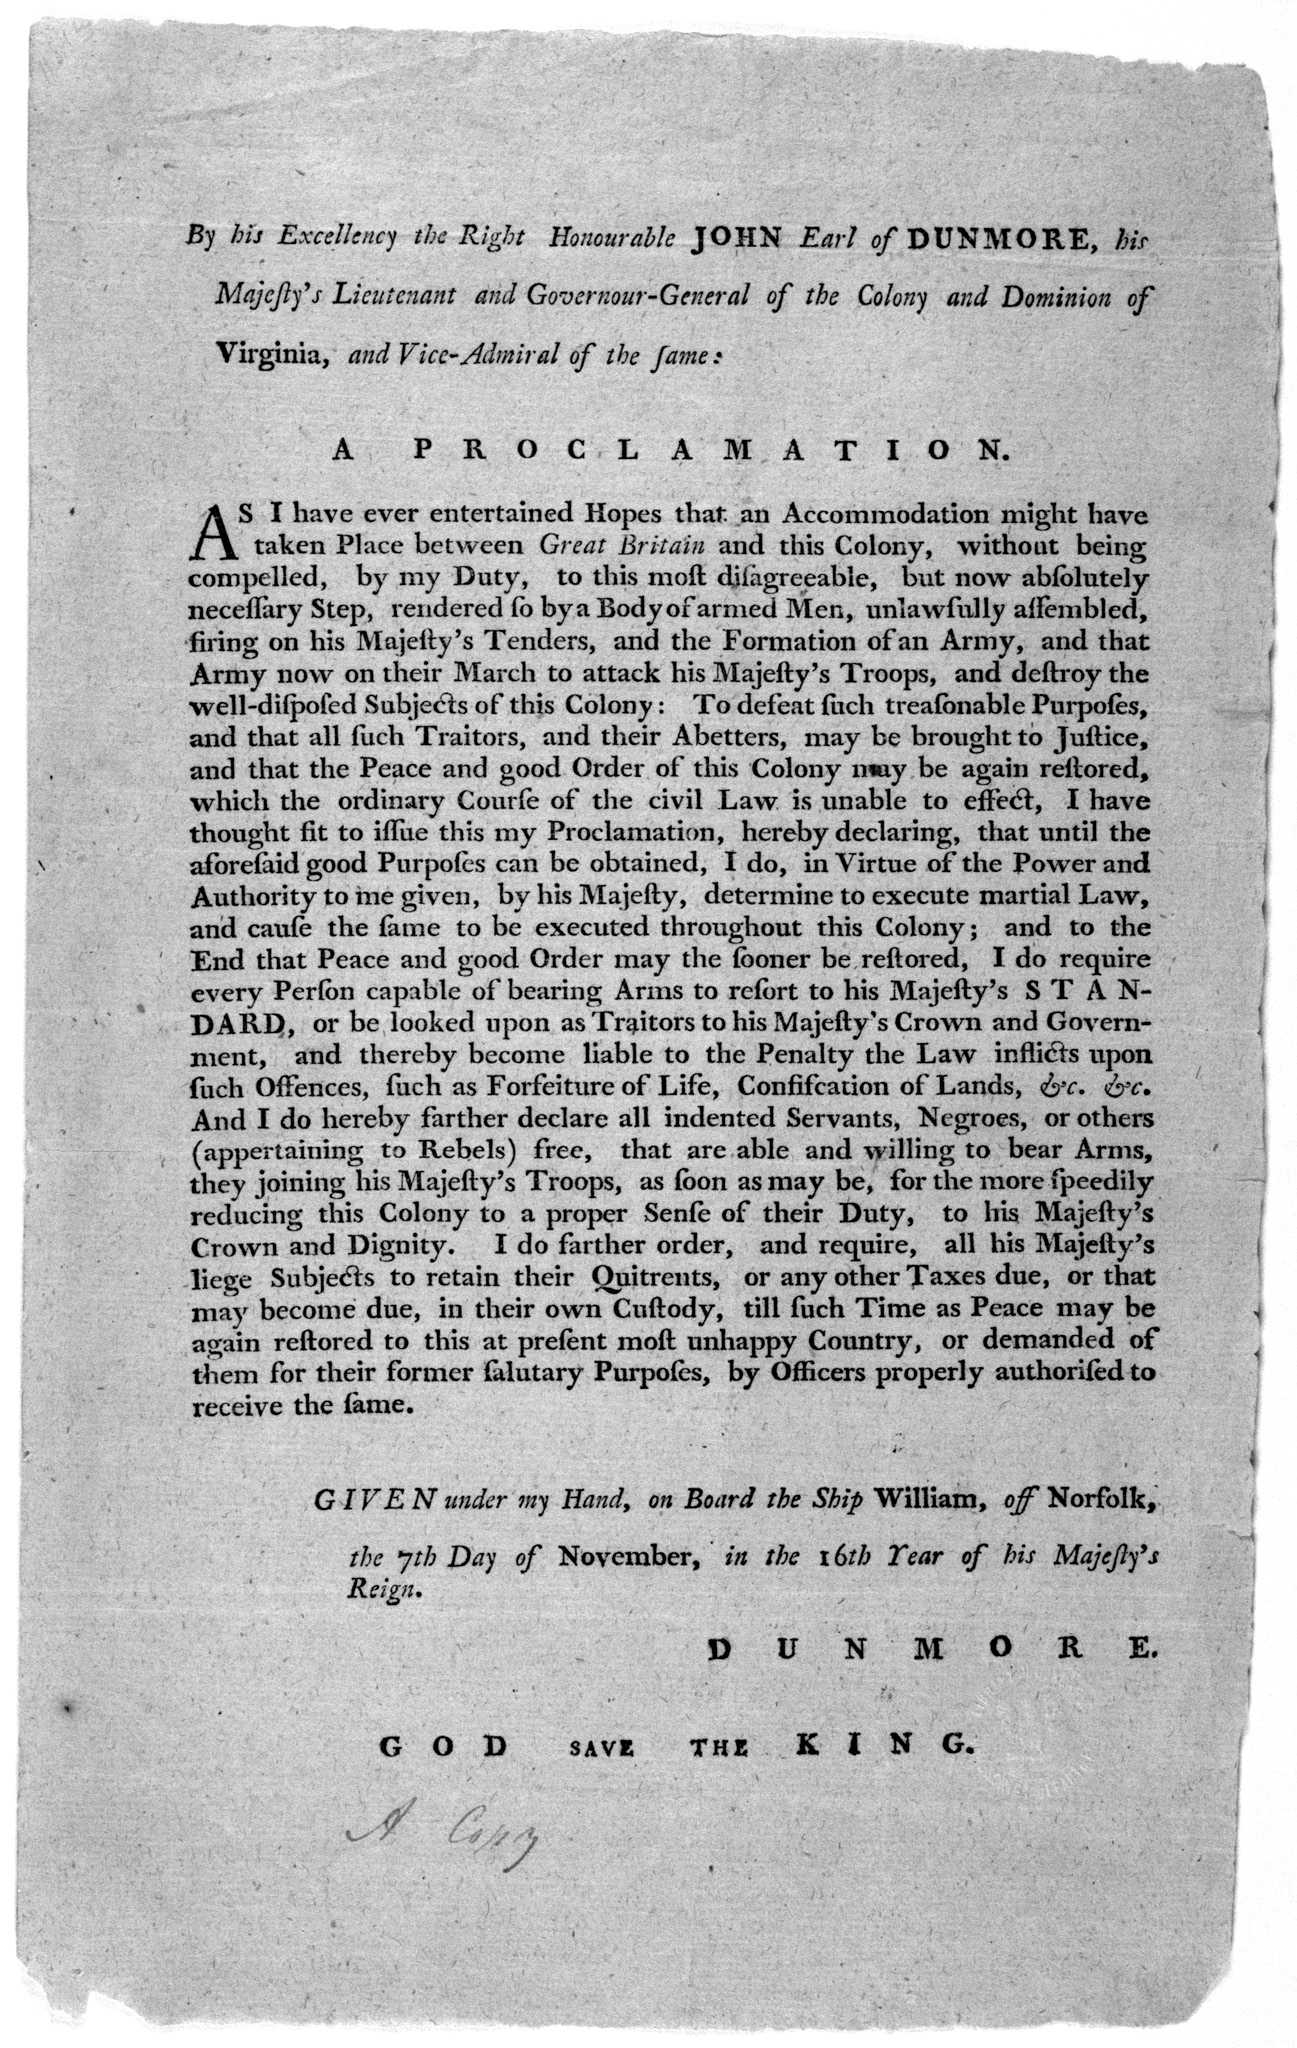 Image of Dunmore’s Proclamation document